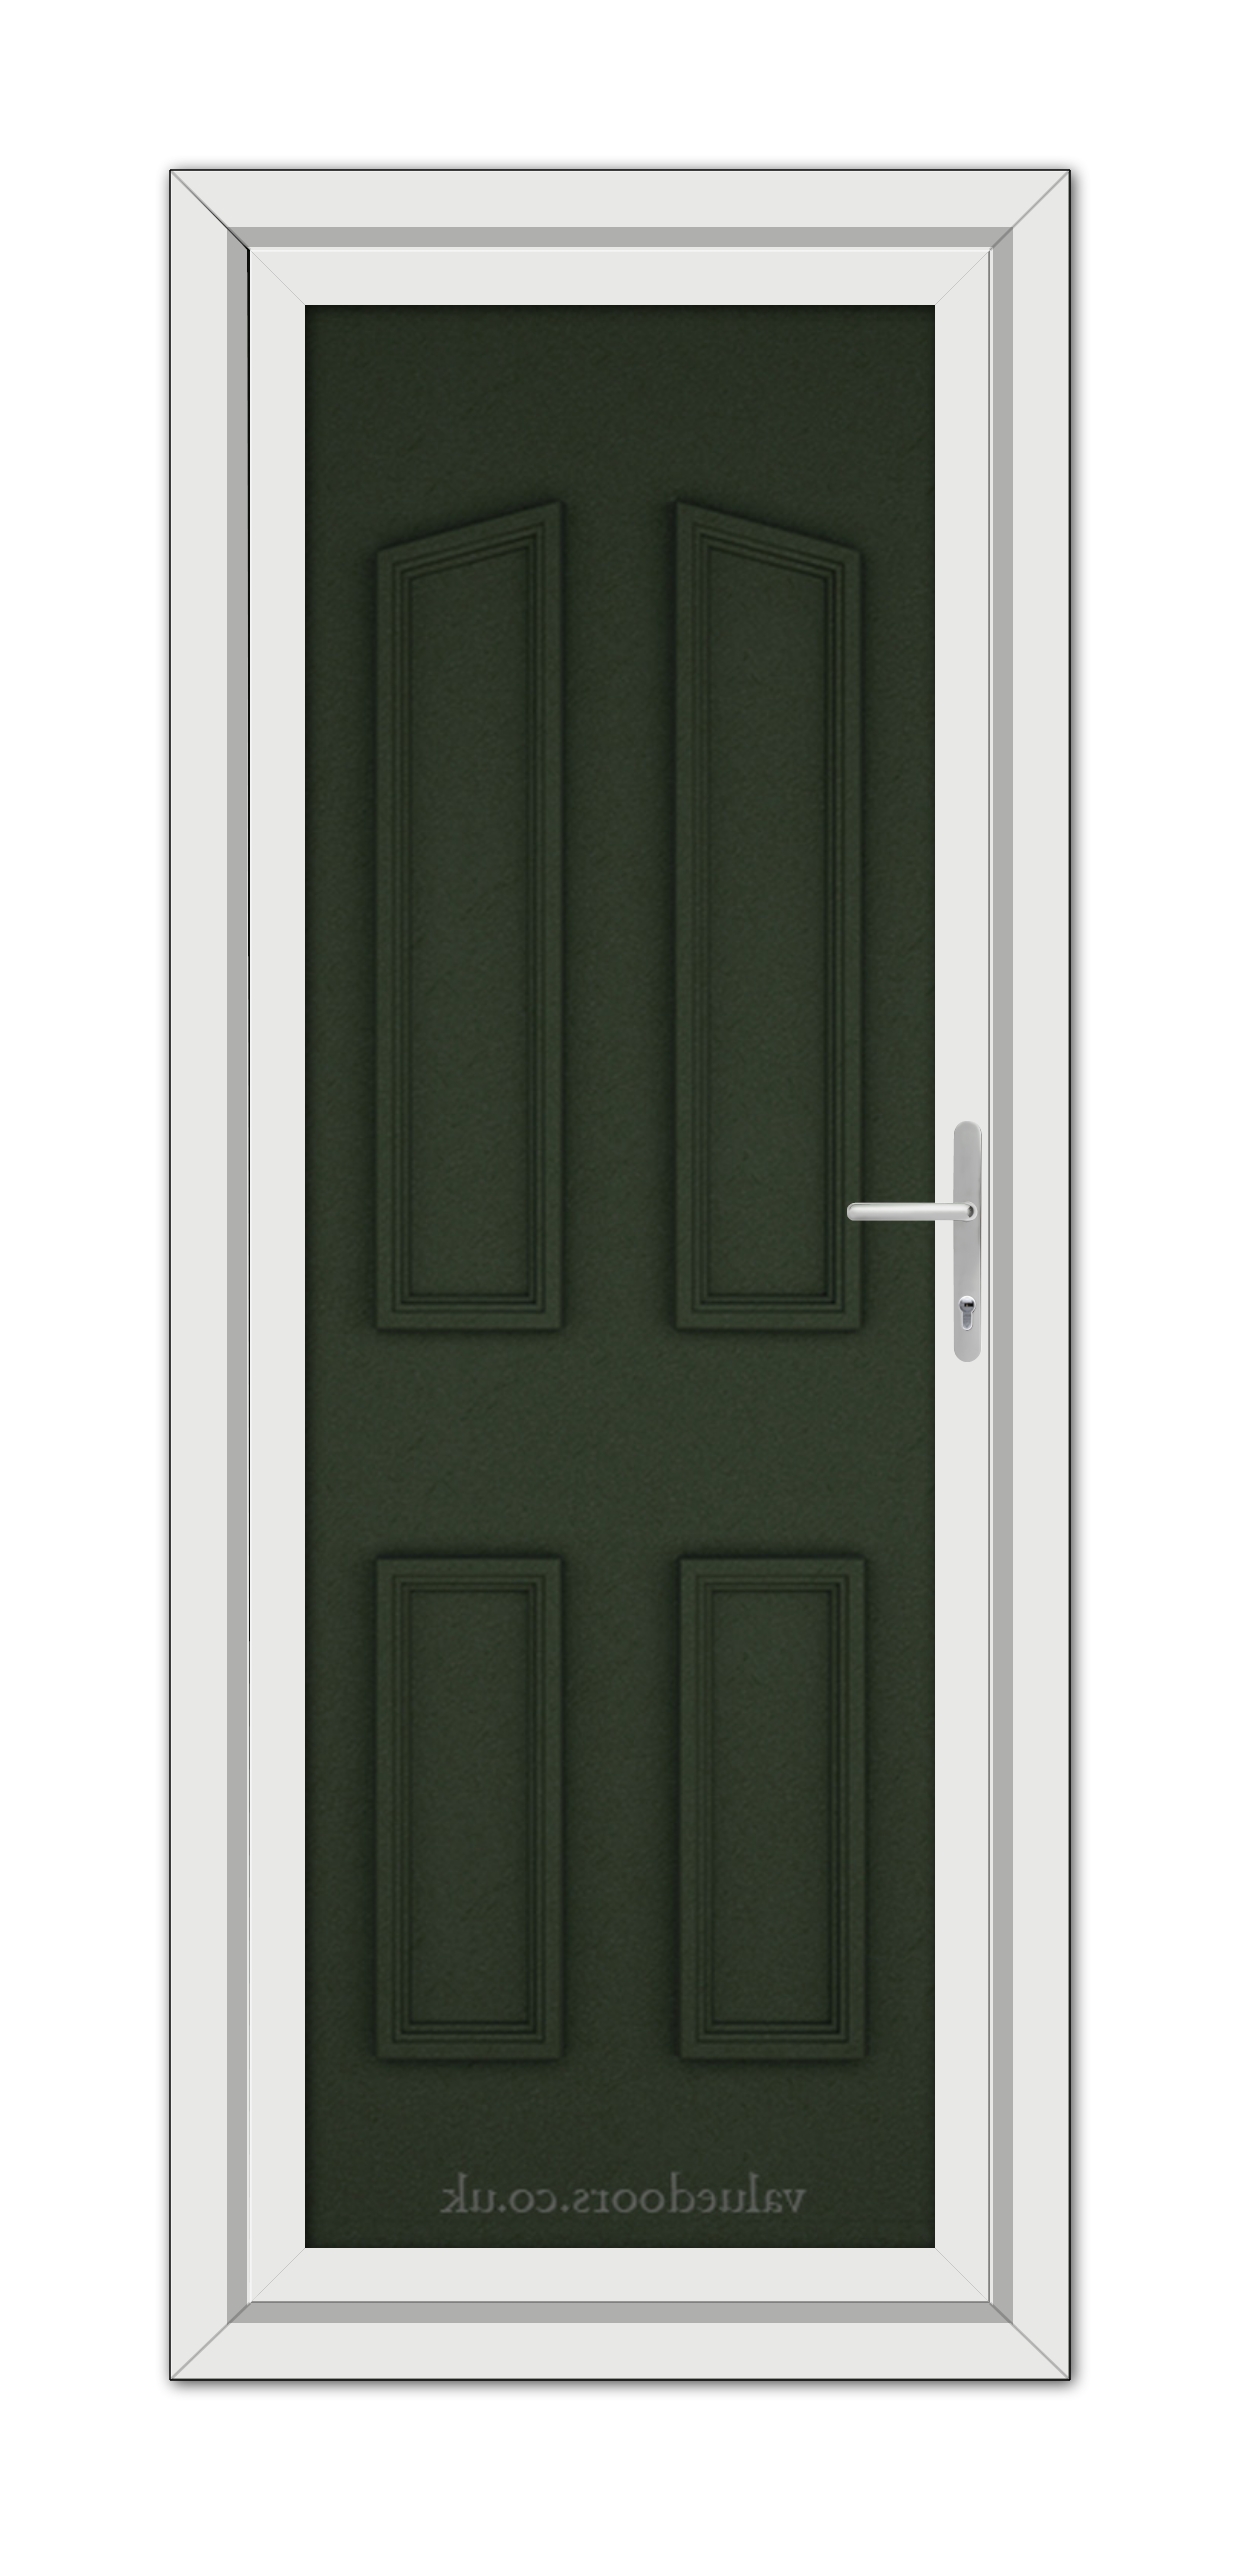 A Green Kensington Solid uPVC Door with white trim.